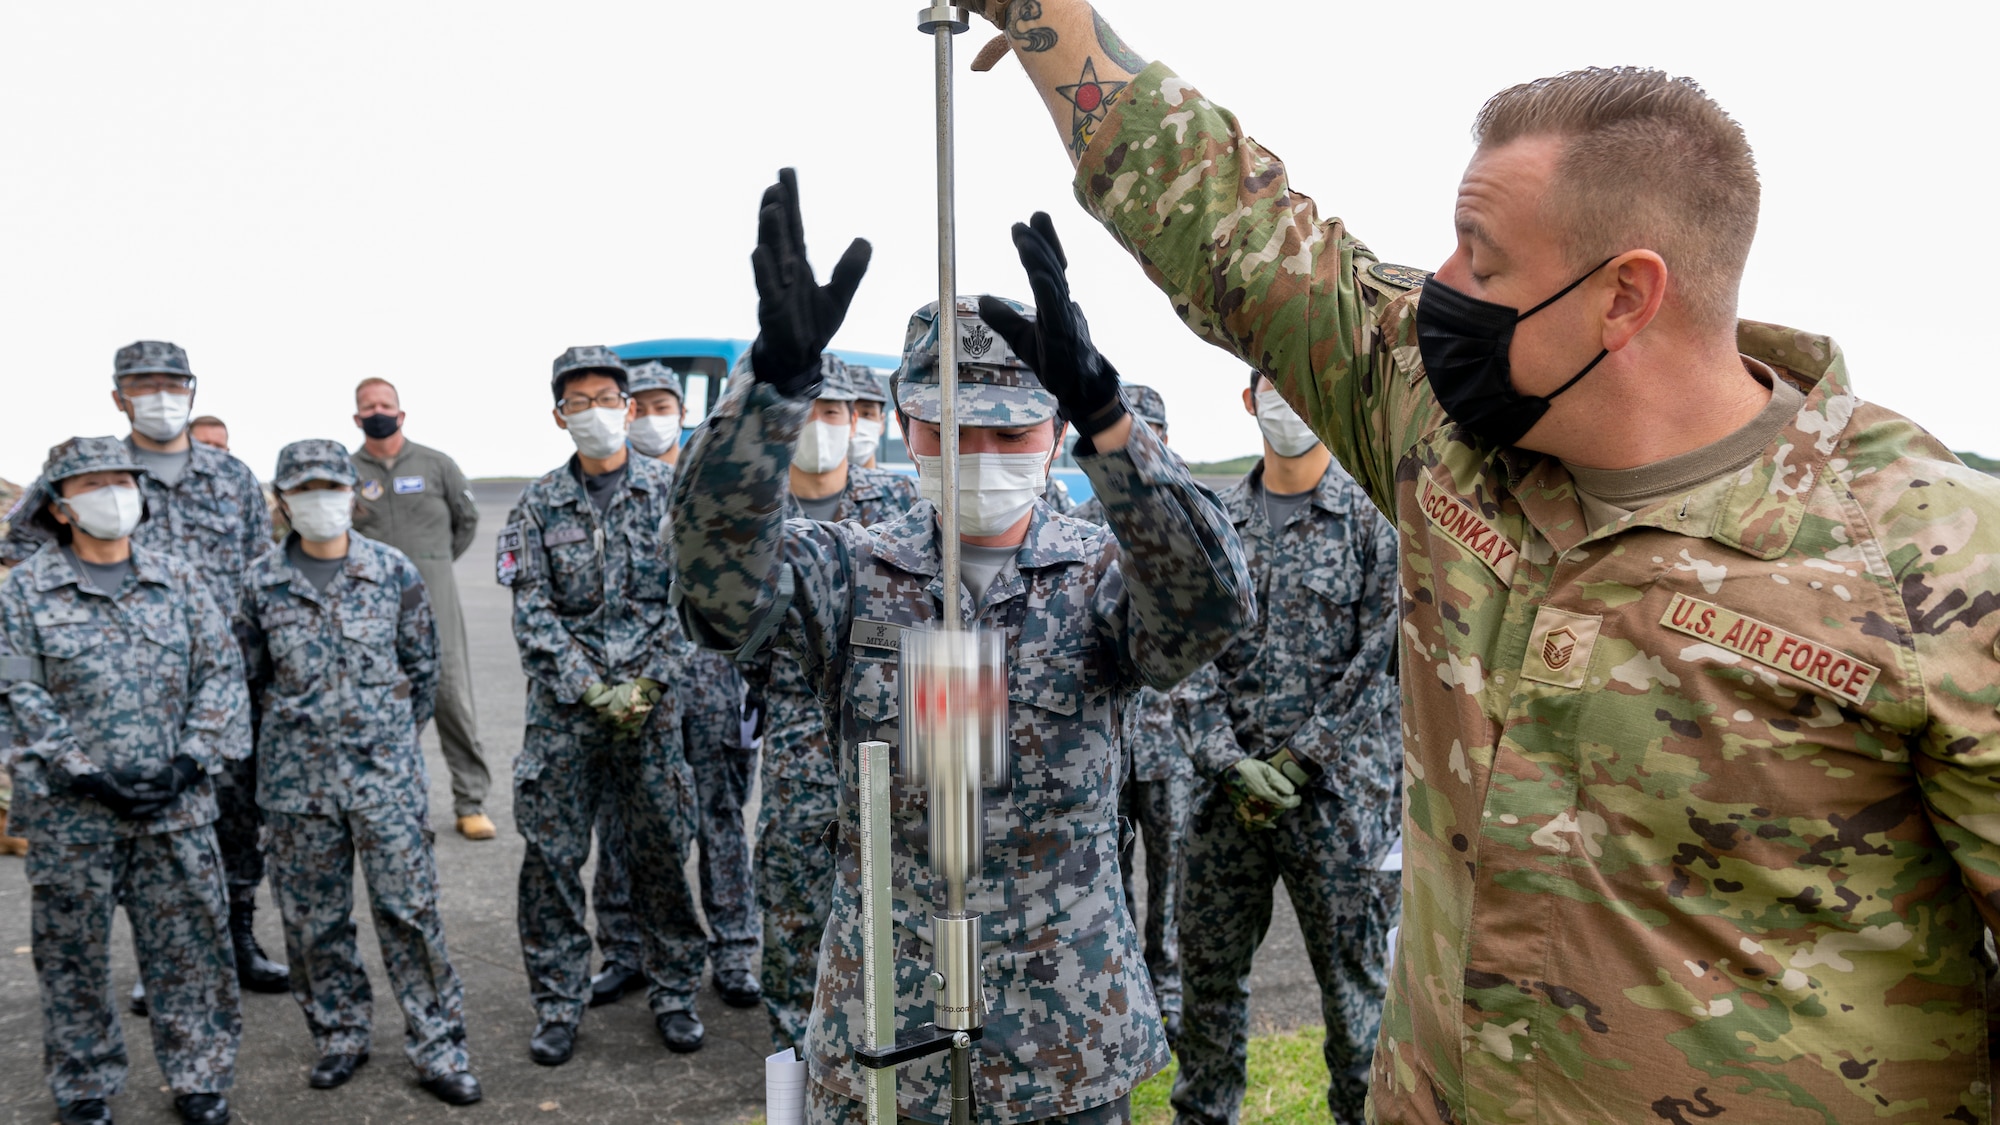 U.S. Air Force Master Sgt. Andrew McConkay, 36th Operations Support Squadron airfield manager, holds a Dynamic Cone Penetrometer (DCP) steady for Japan Maritime Self-Defense Force Senior Airman Aya Mukai, security specialist, as he drops a calibrated weight onto a measuring spike while conducting airfield survey operations during the Cope North 23 exercise, on the remote island of Iwo Jima, Japan, Feb. 21, 2023.